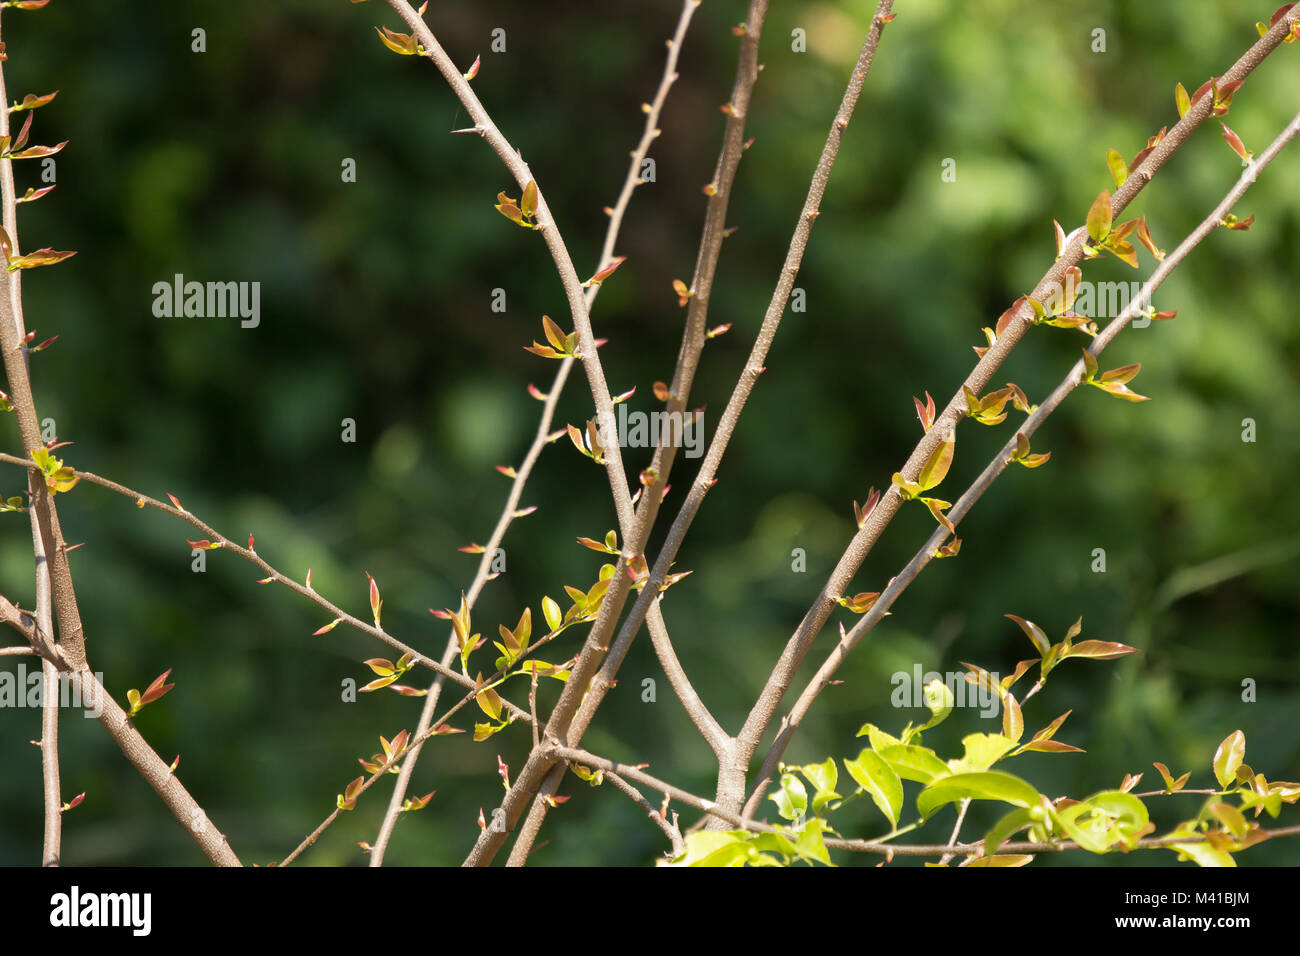 Young Green leaf of Fried Egg Tree  or  Oncoba spinosa Forssk. Stock Photo